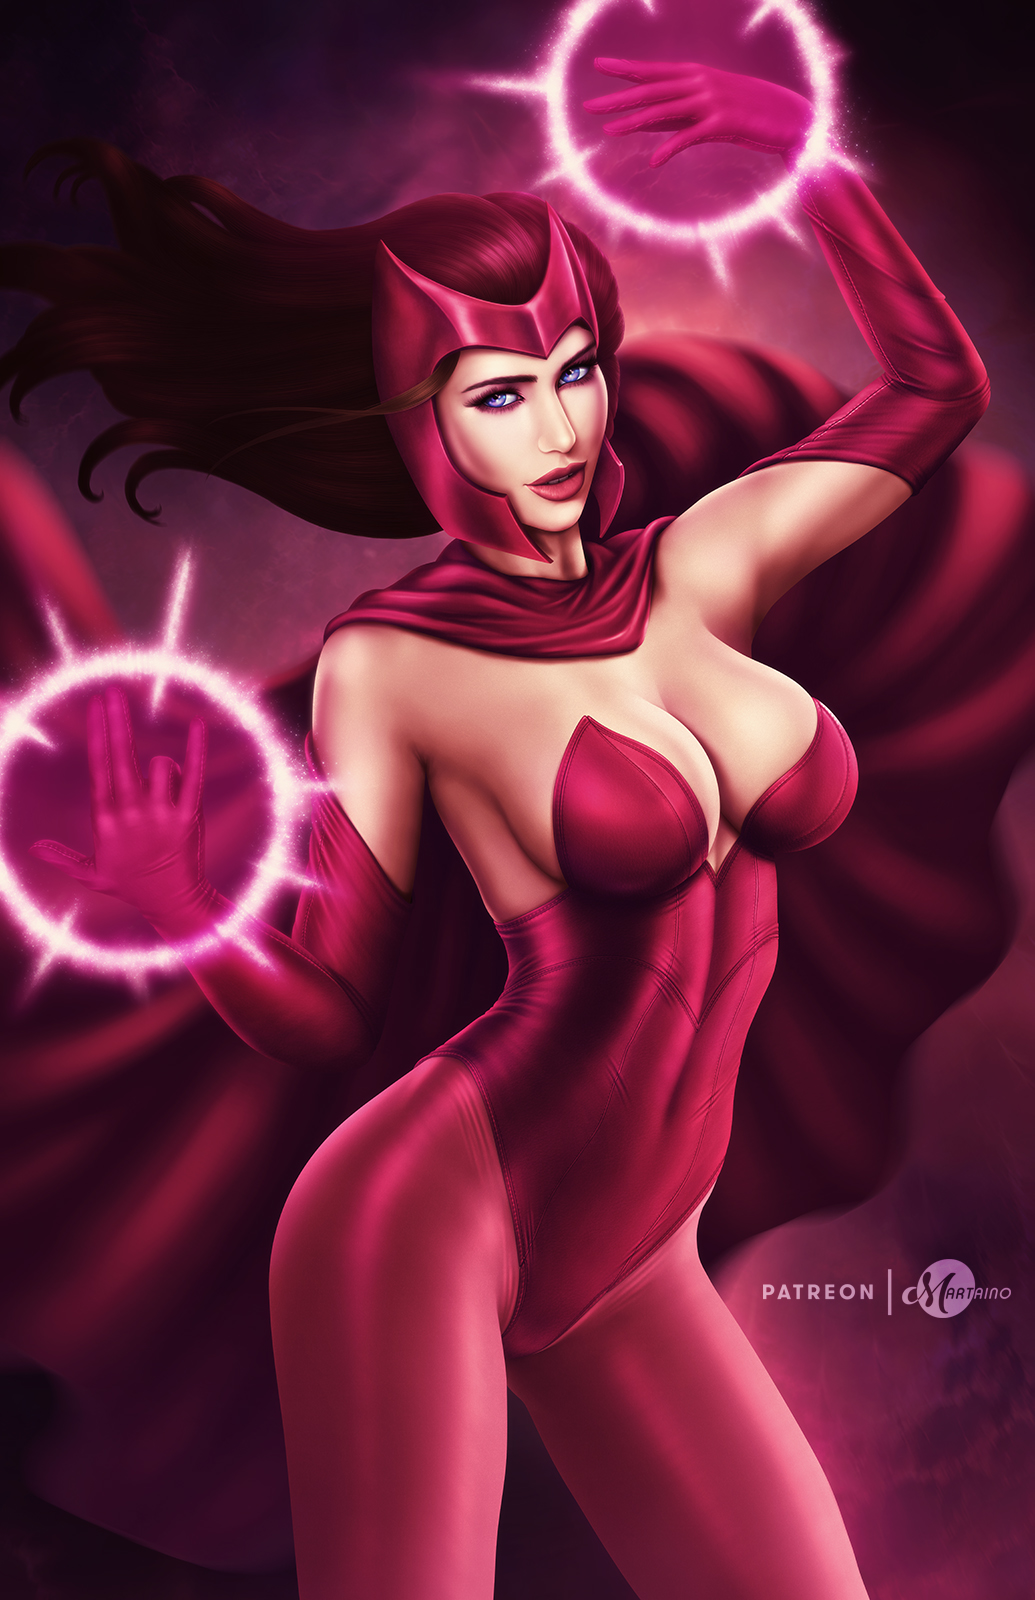 Nude the red witch Category:Nude women